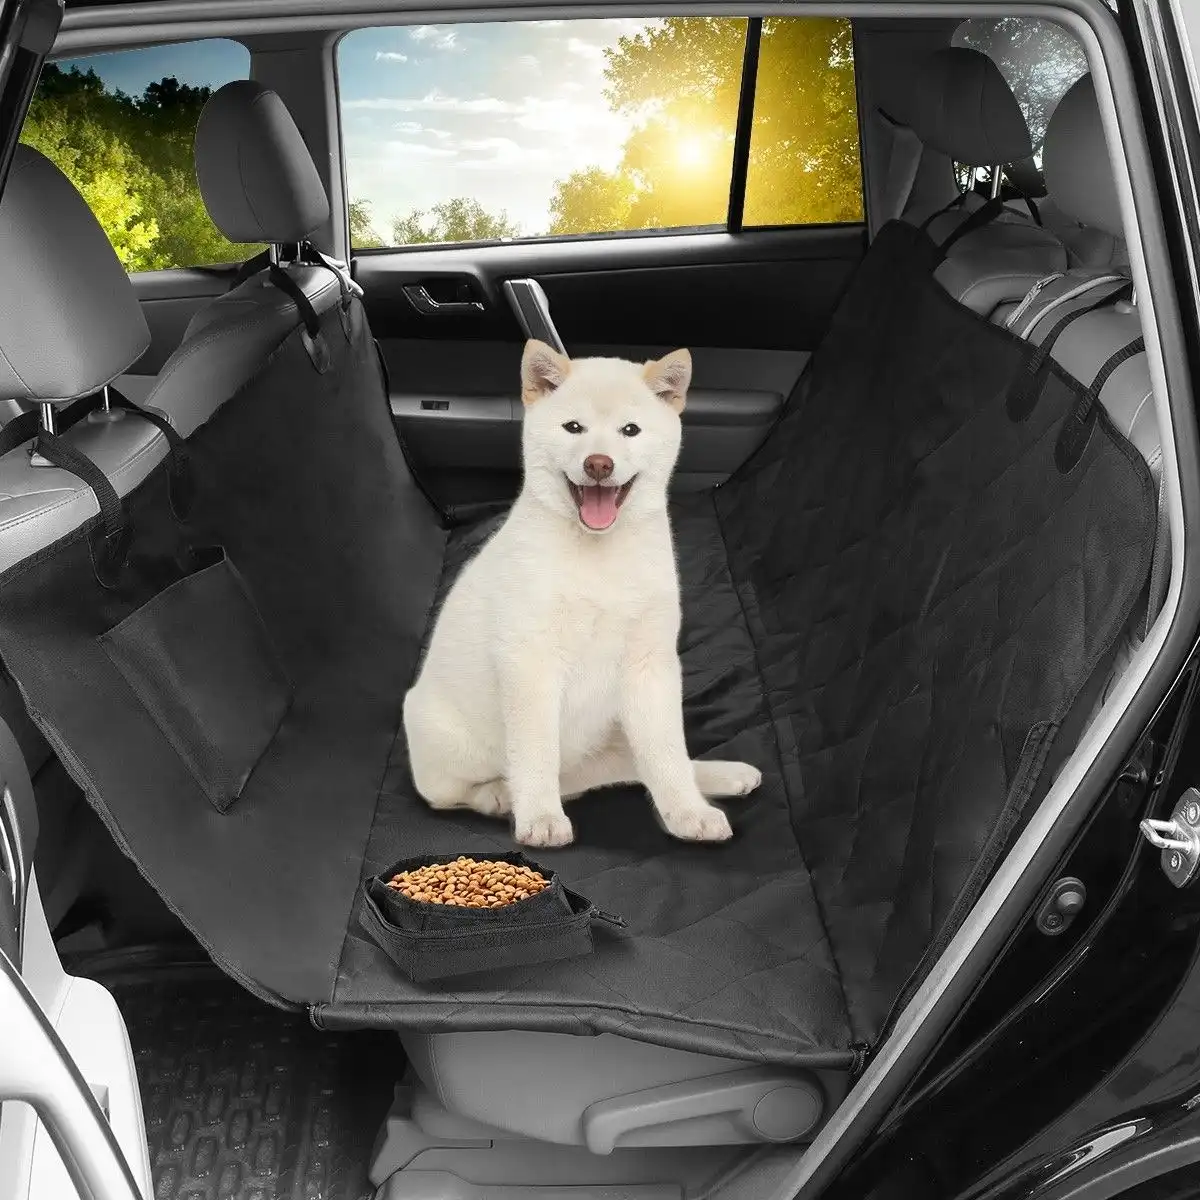 Ausway Waterproof Dog Car Seat Cover Hammock Mat with Fabric Bowl